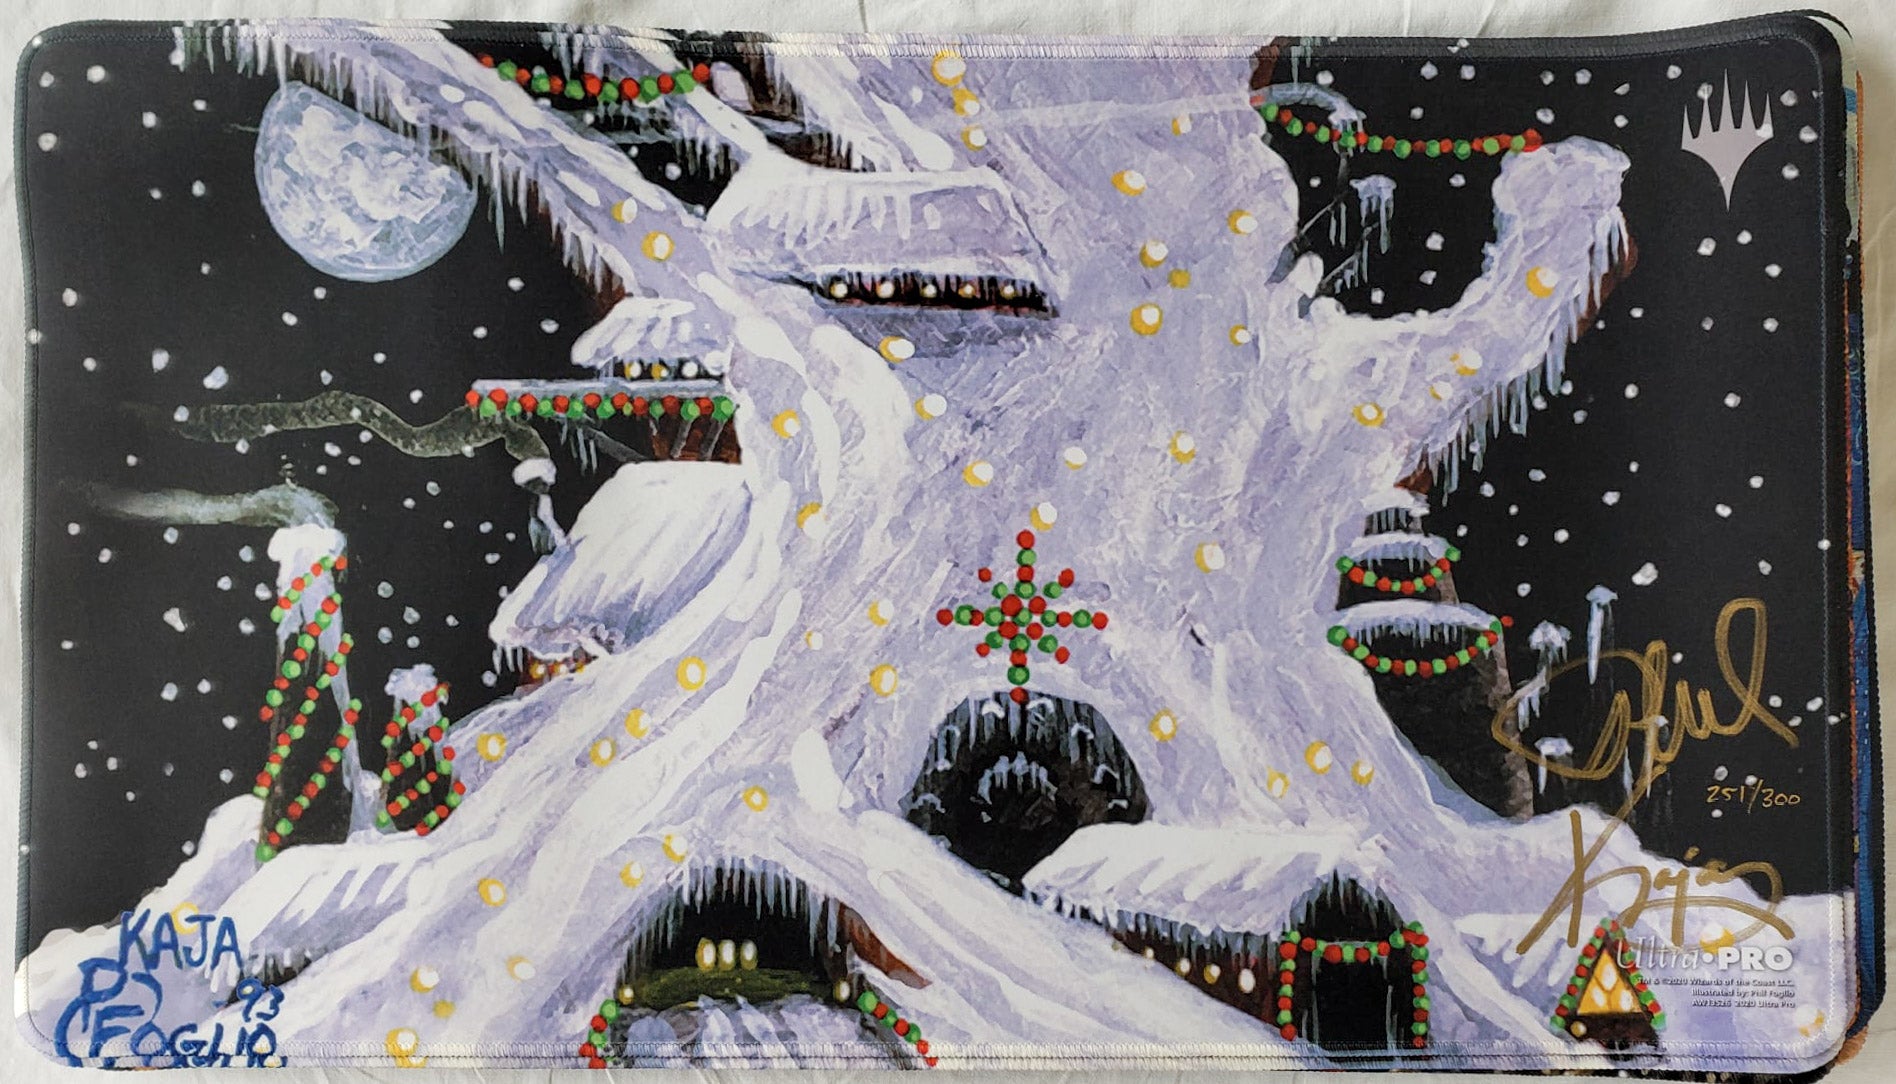 Mishra's Factory (Winter) - Kaja Foglio & Phil Foglio - Limited Edition  [300 Copies] - Embroidered - Signed by the Artist - MTG Playmat